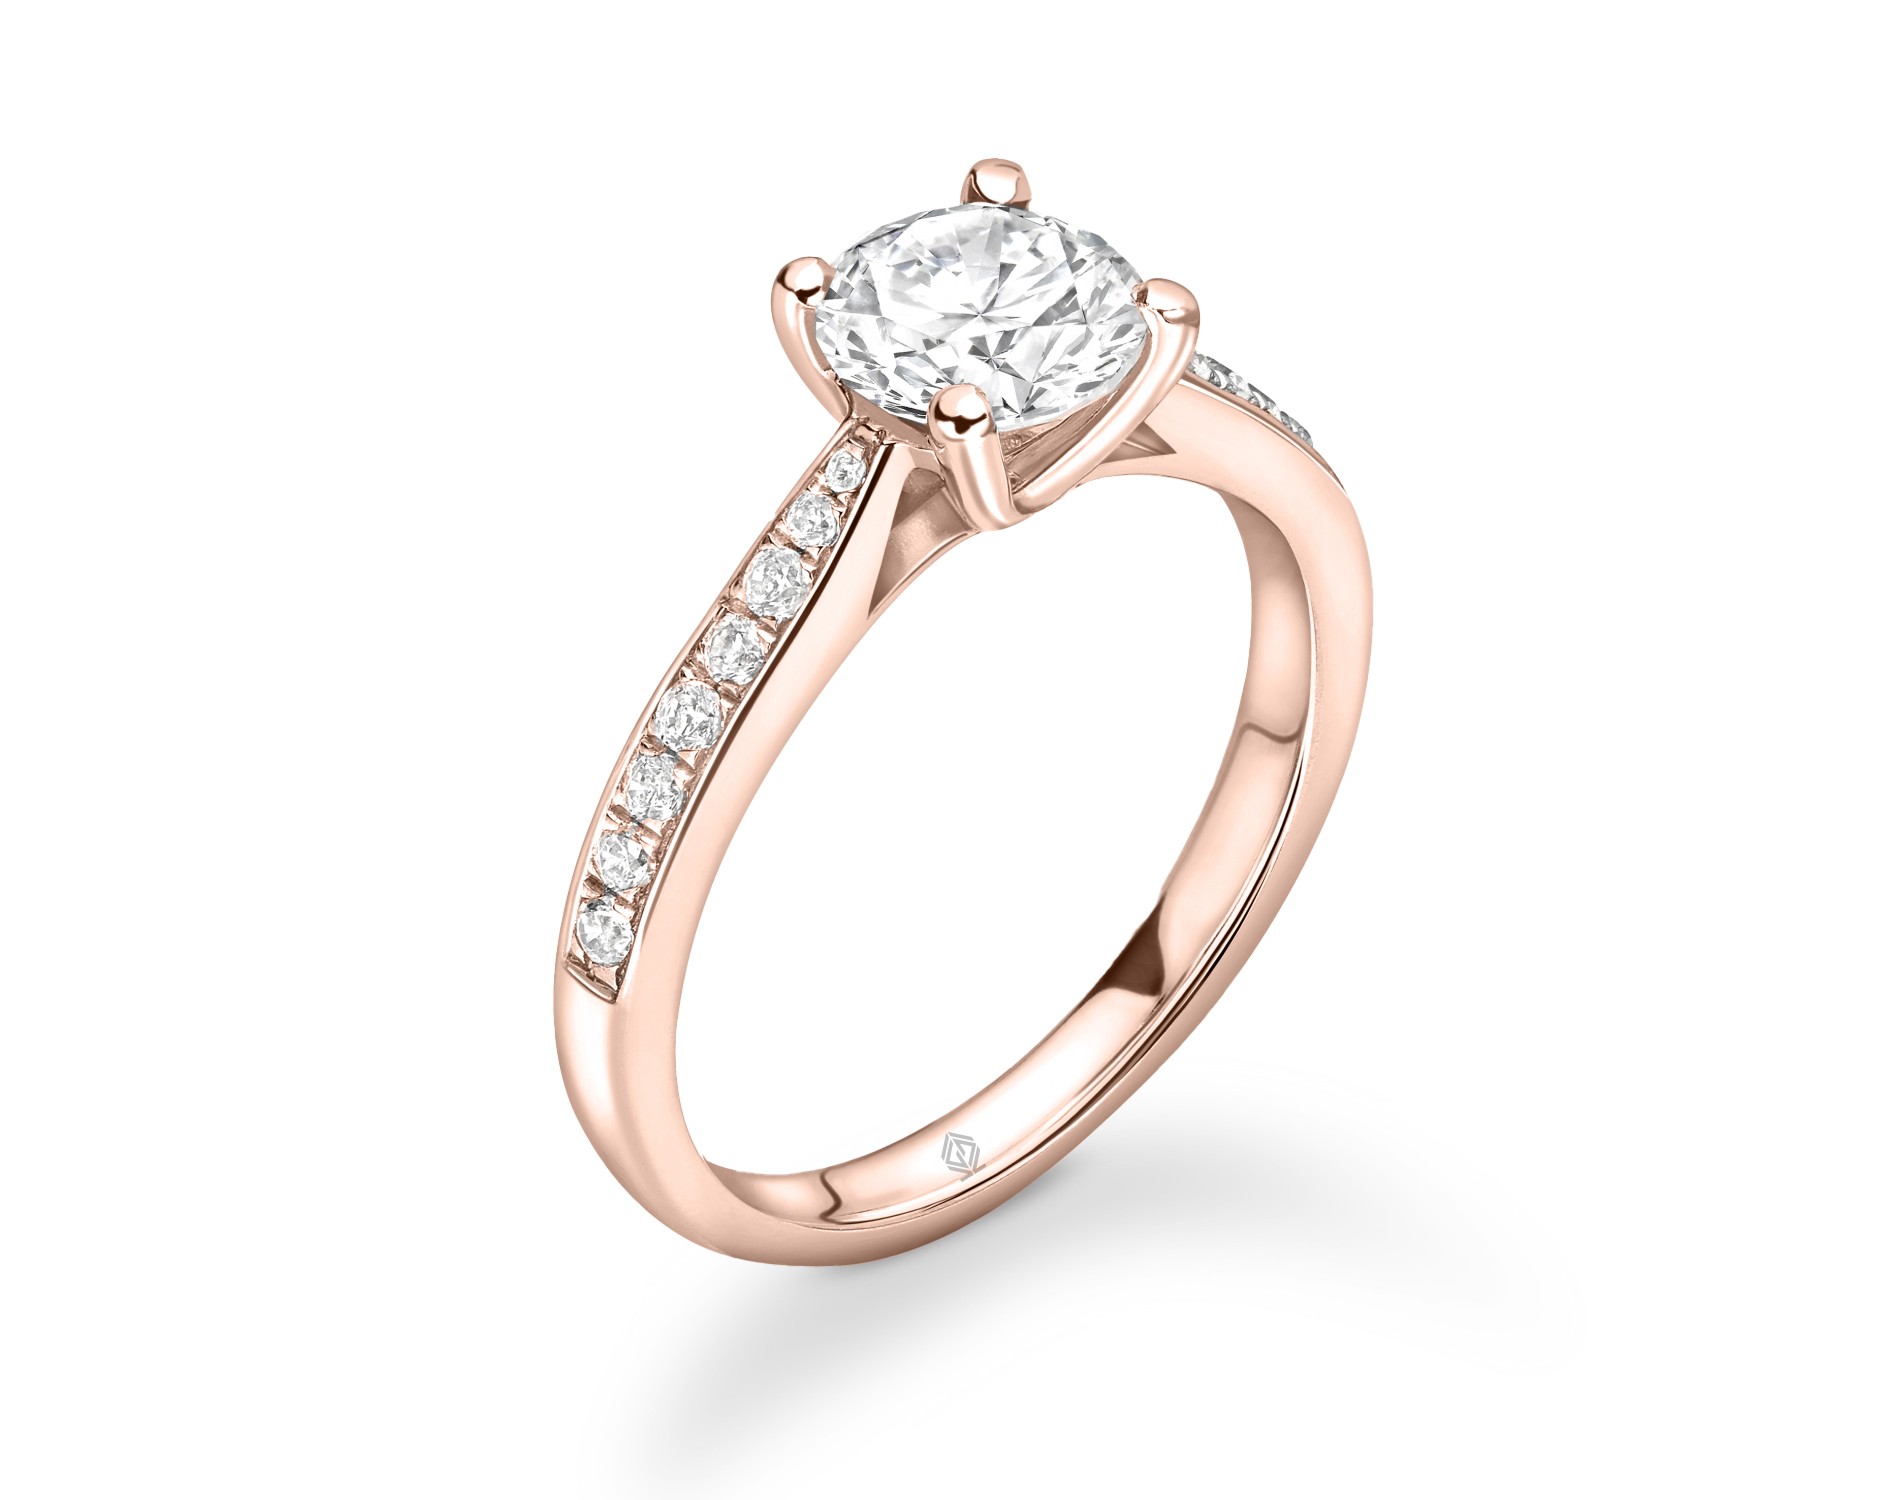 18K ROSE GOLD ROUND CUT DIAMOND ENGAGEMENT RING WITH SIDE STONES CHANNEL SET